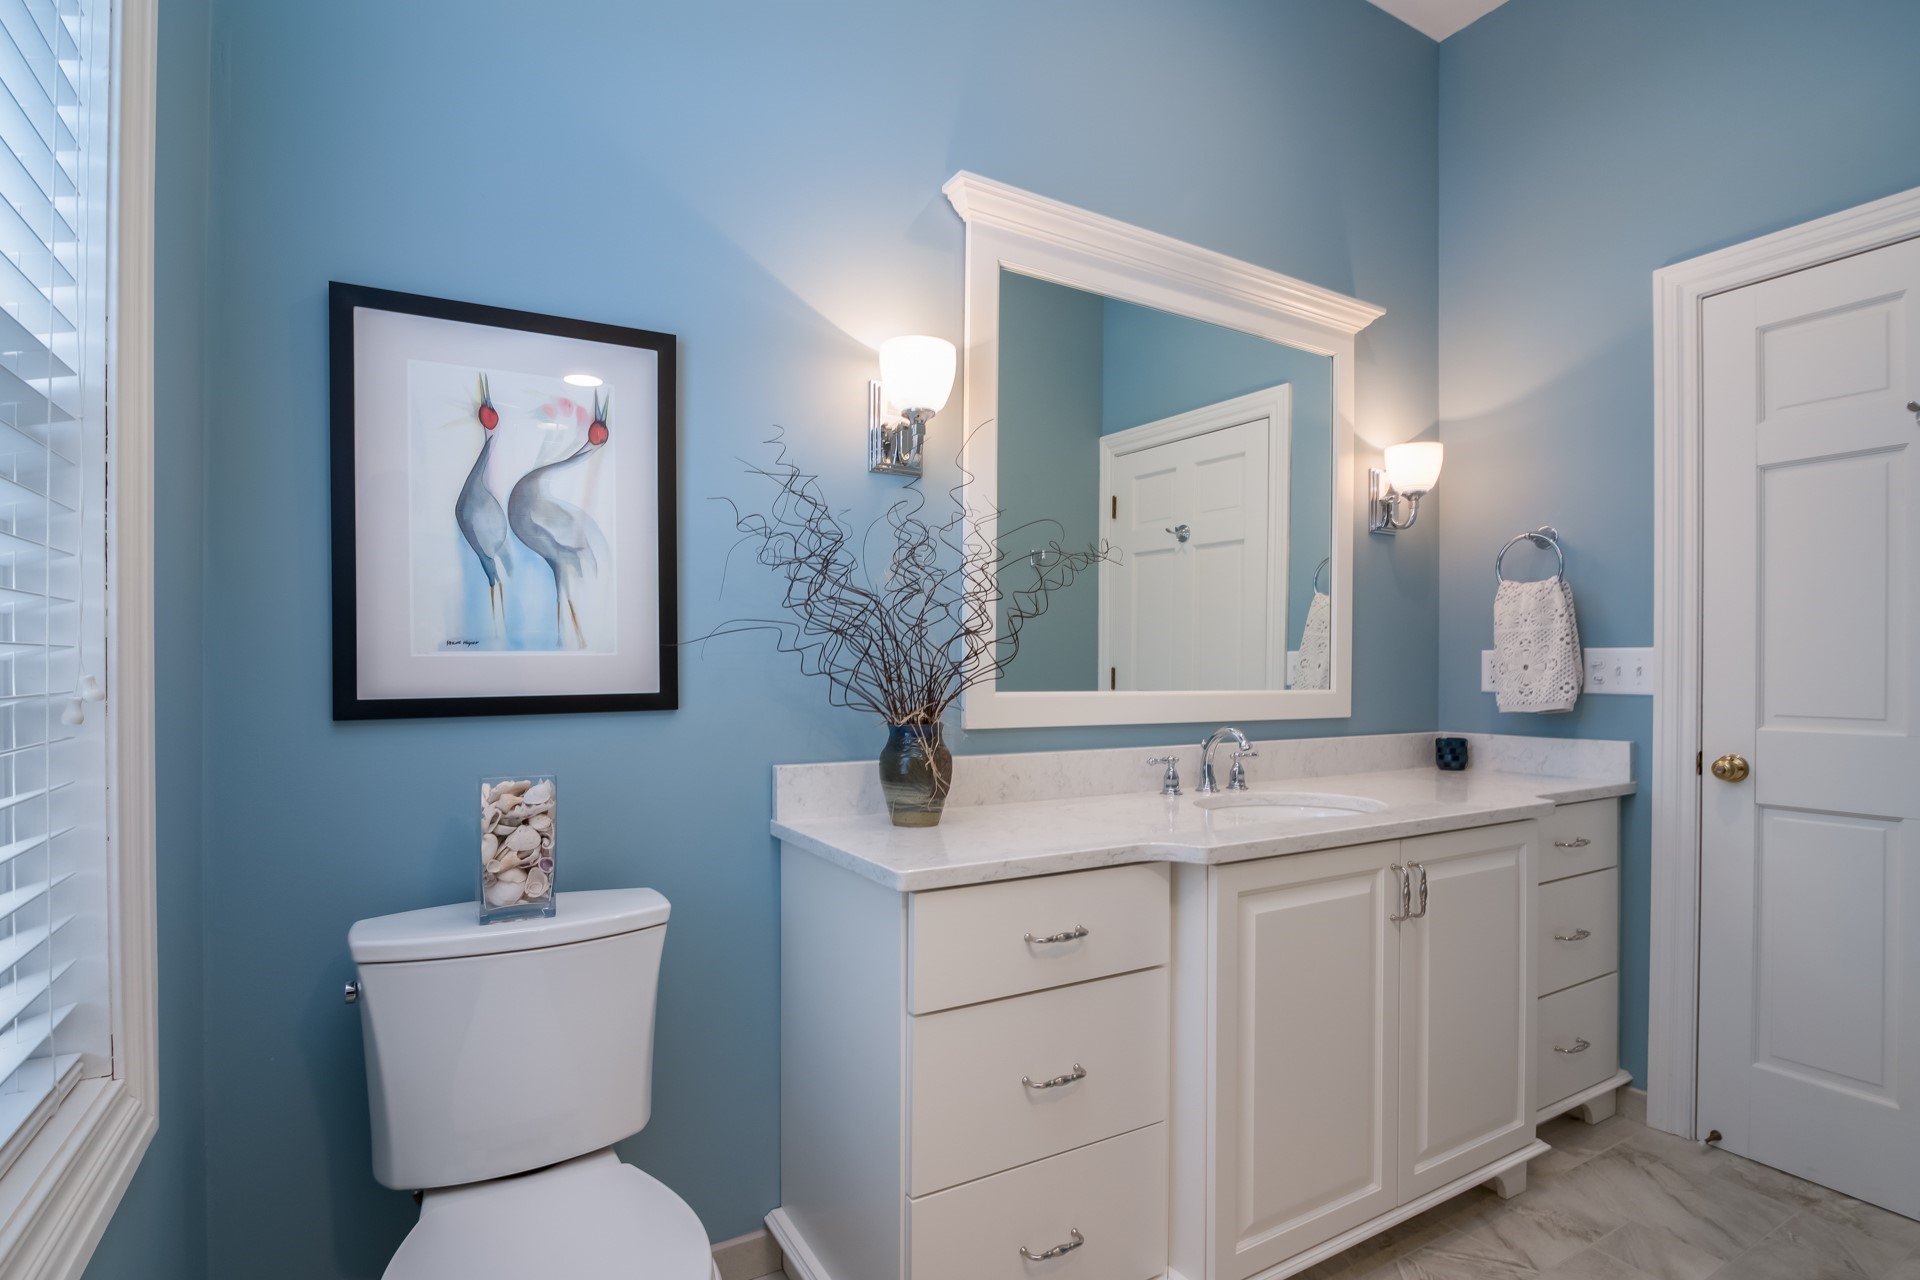 What Are The Best Bathroom Color Combinations? 5 Pairings To Try